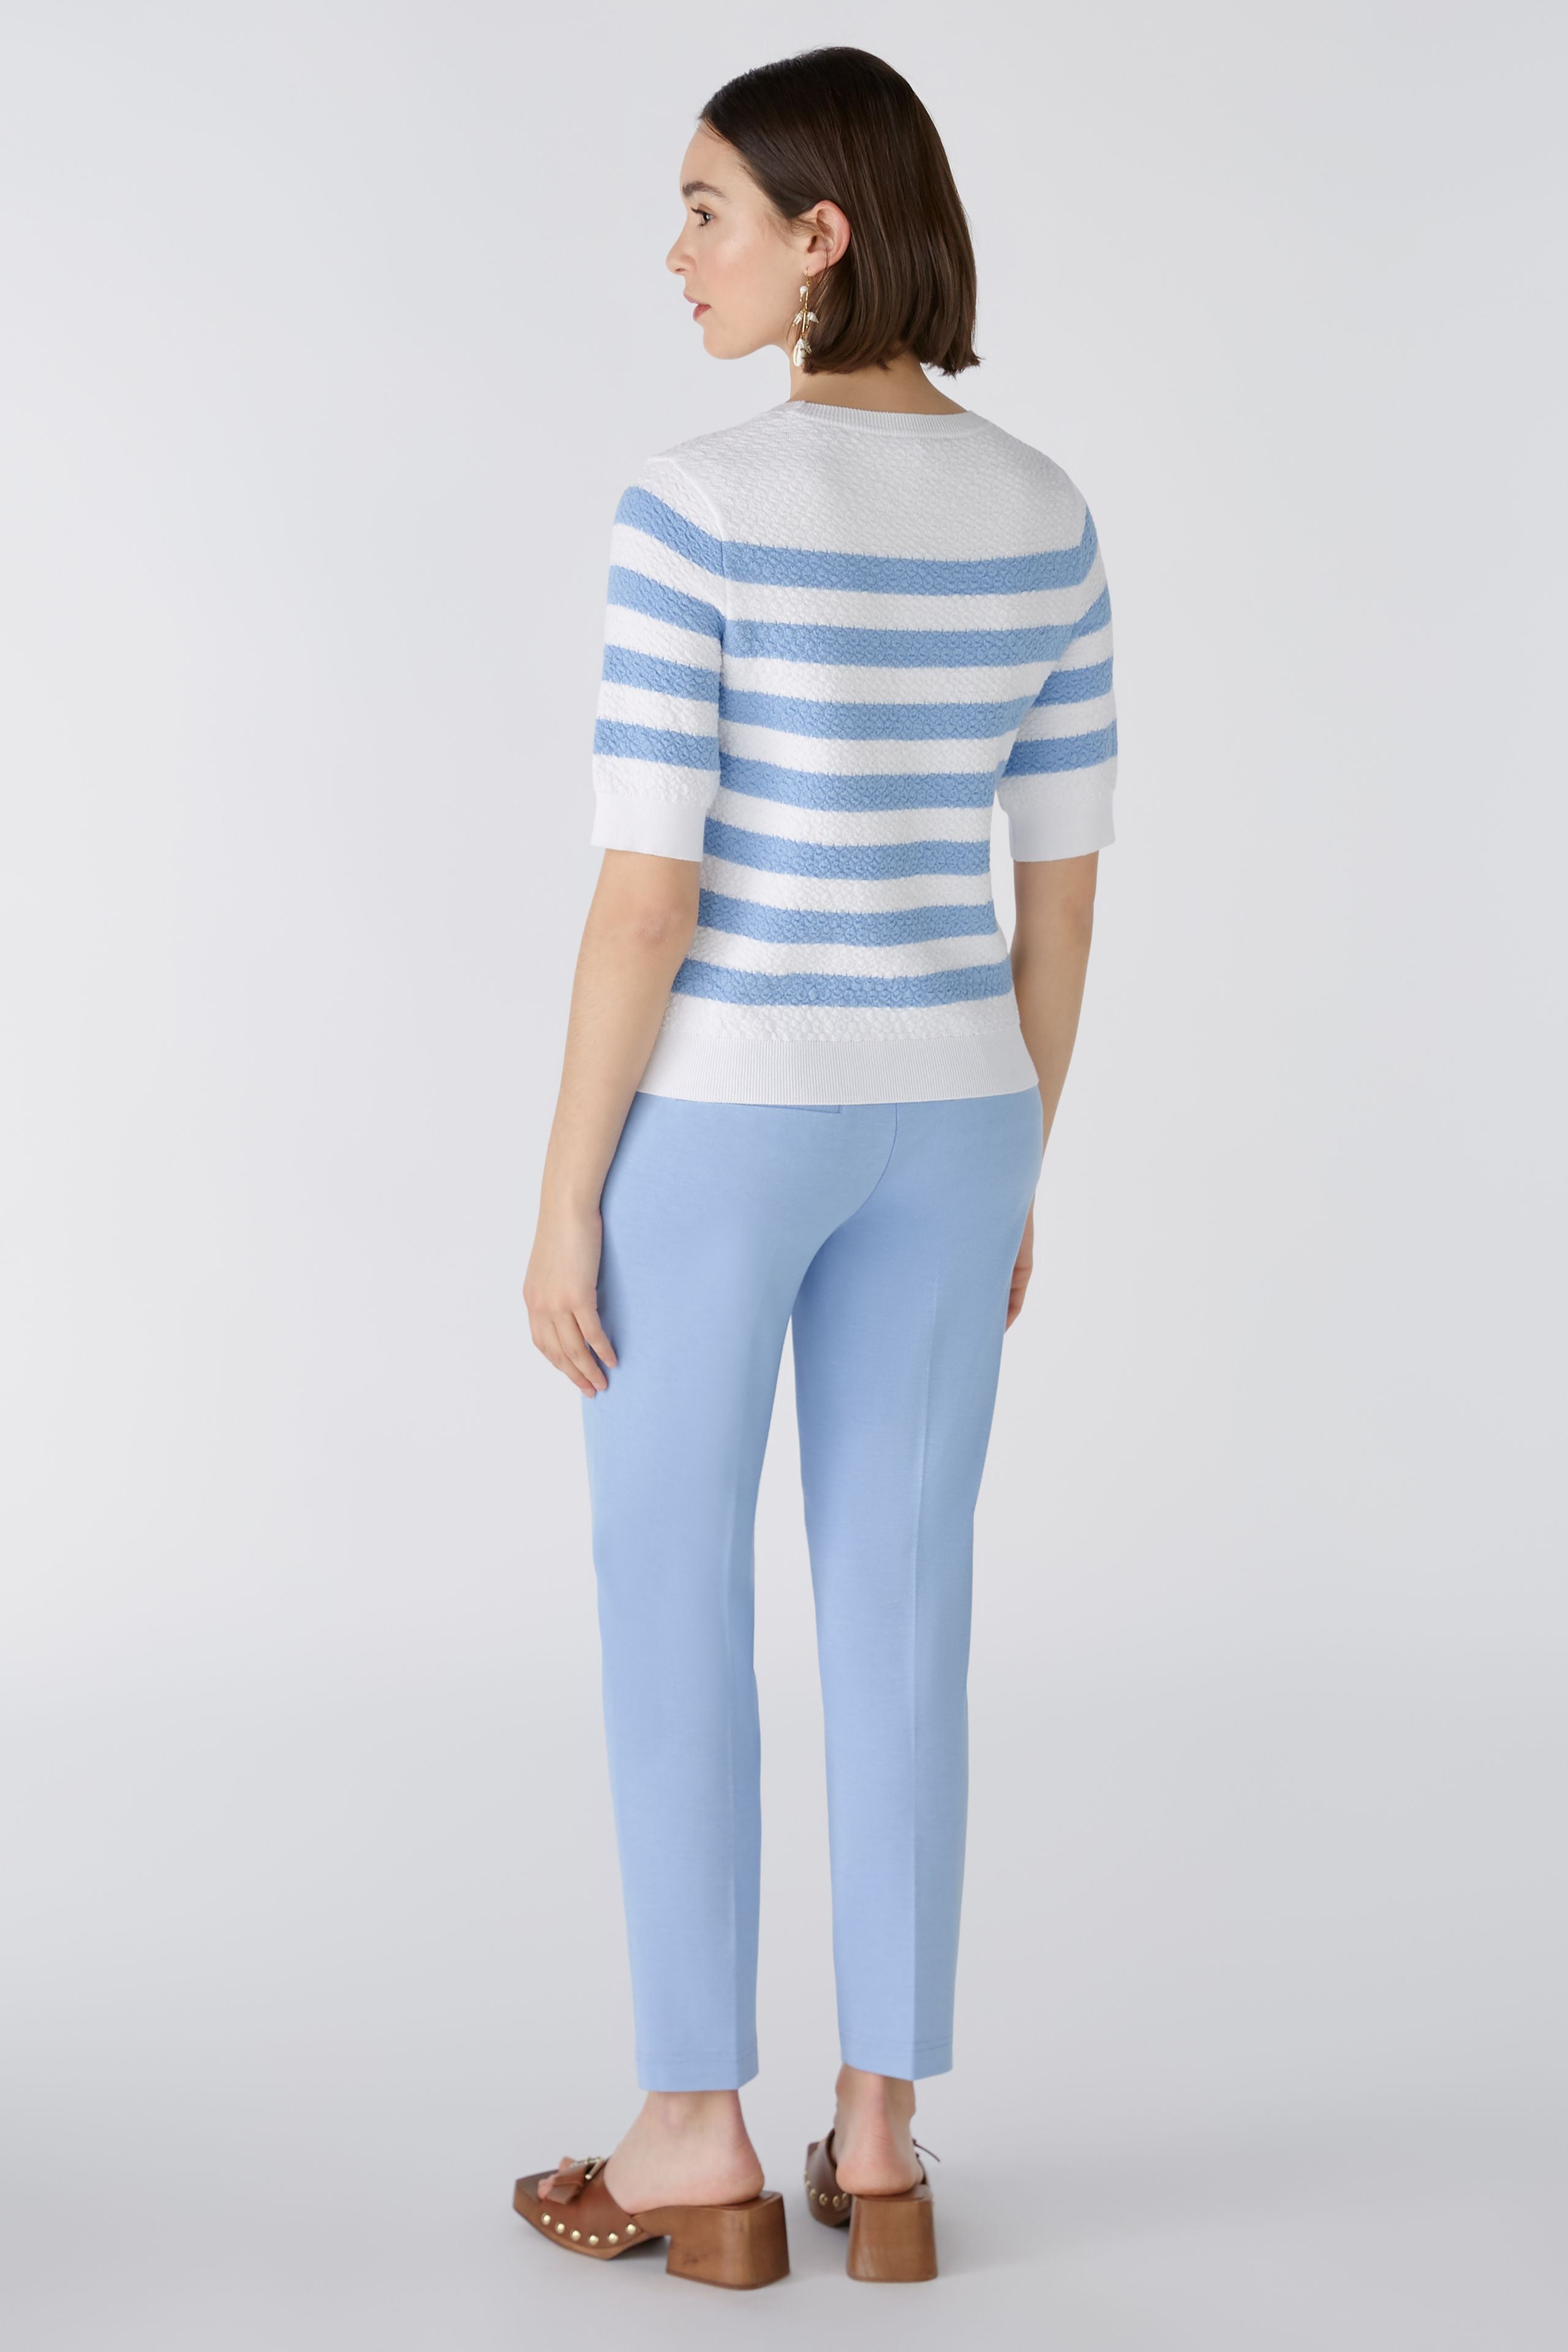 Knitted Stripe Jumper in Off White/Blue